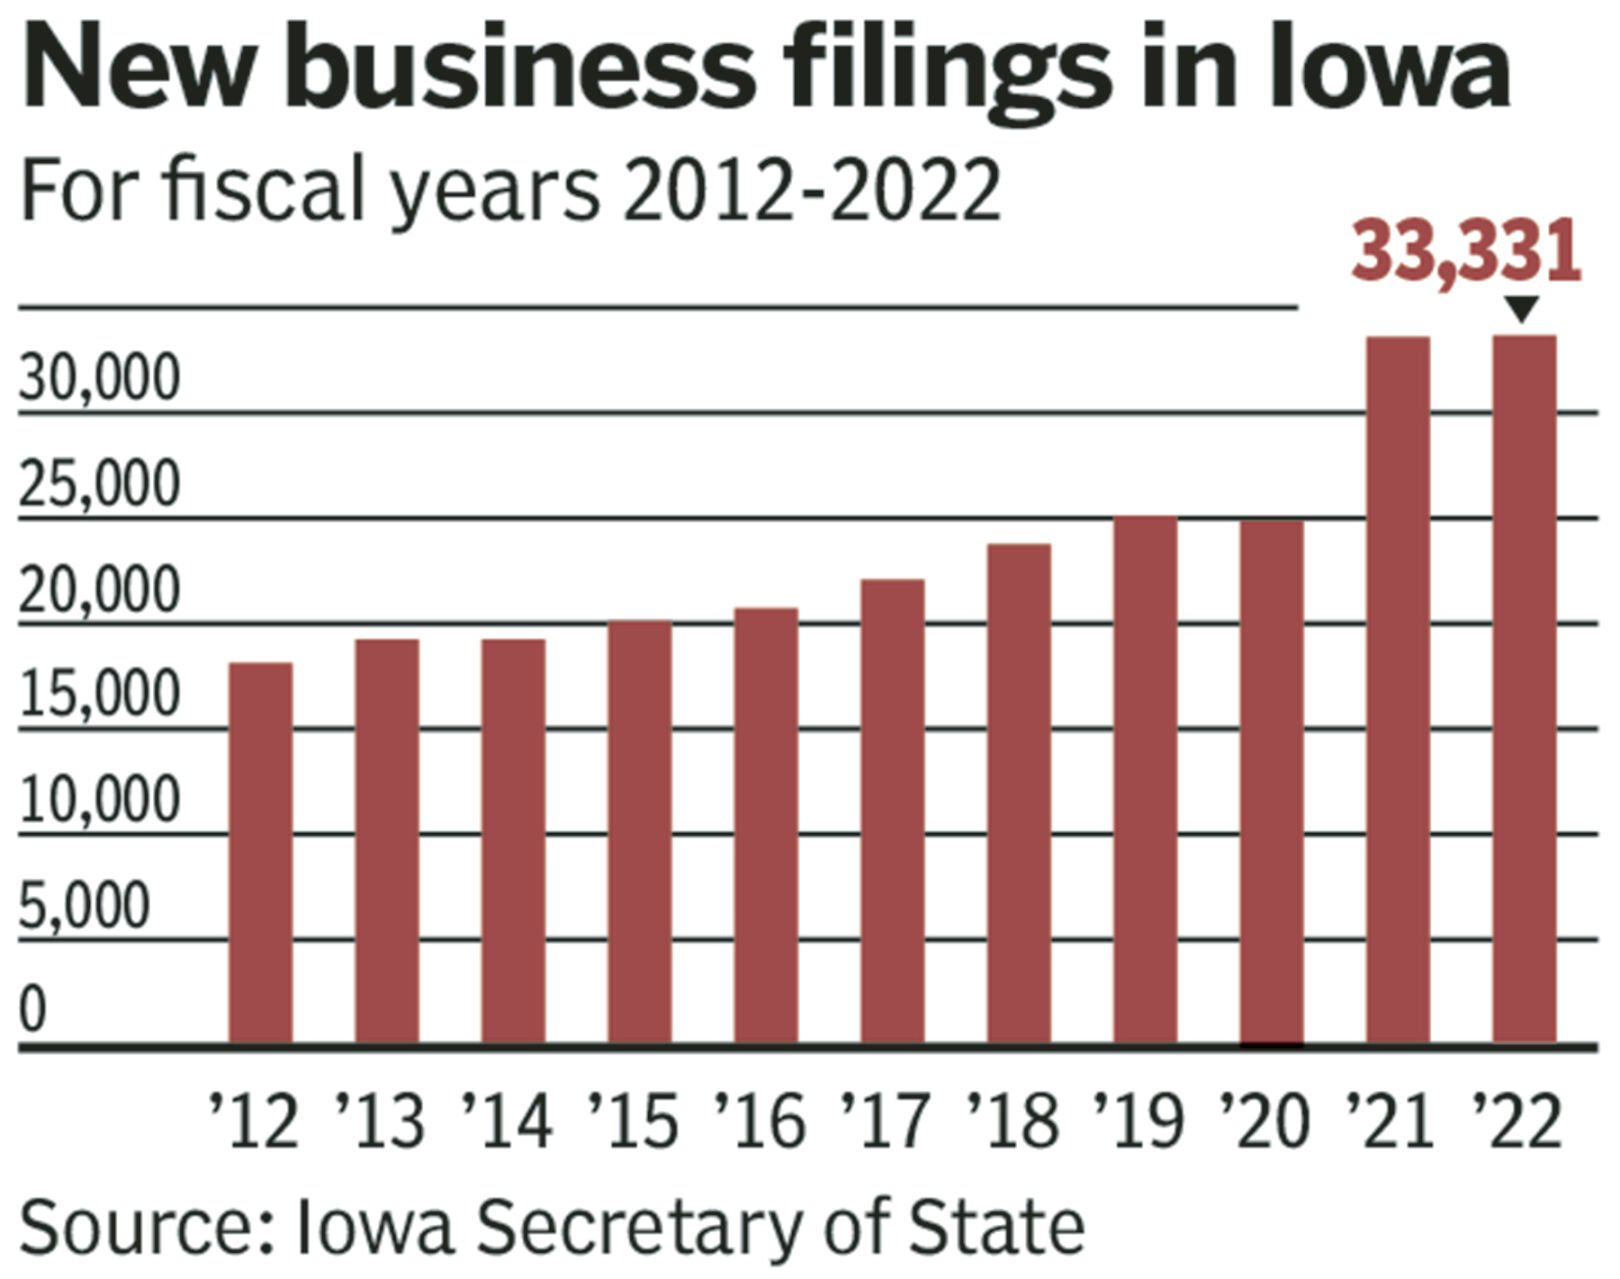 New business filings in Iowa for fiscal years 2012 to 2022.    PHOTO CREDIT: Mike Day